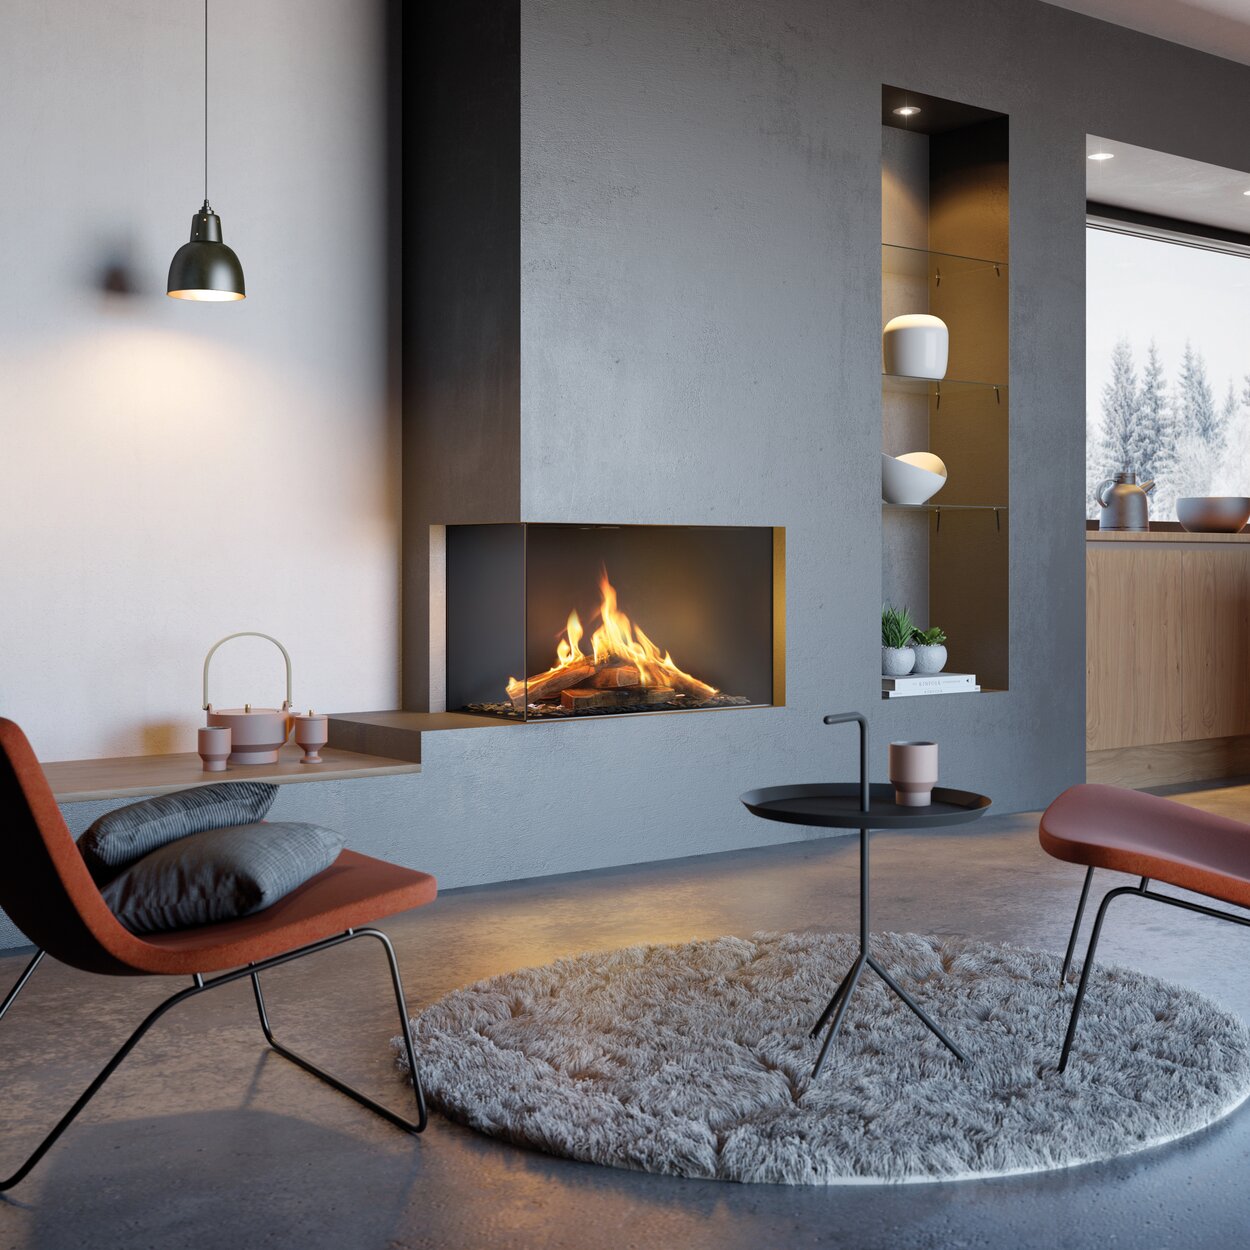 VISIO 90 LC gas fireplace complements the kitchen as a corner fireplace on the left and offers a cosy reading corner with minimalist armchairs in rust-red upholstery